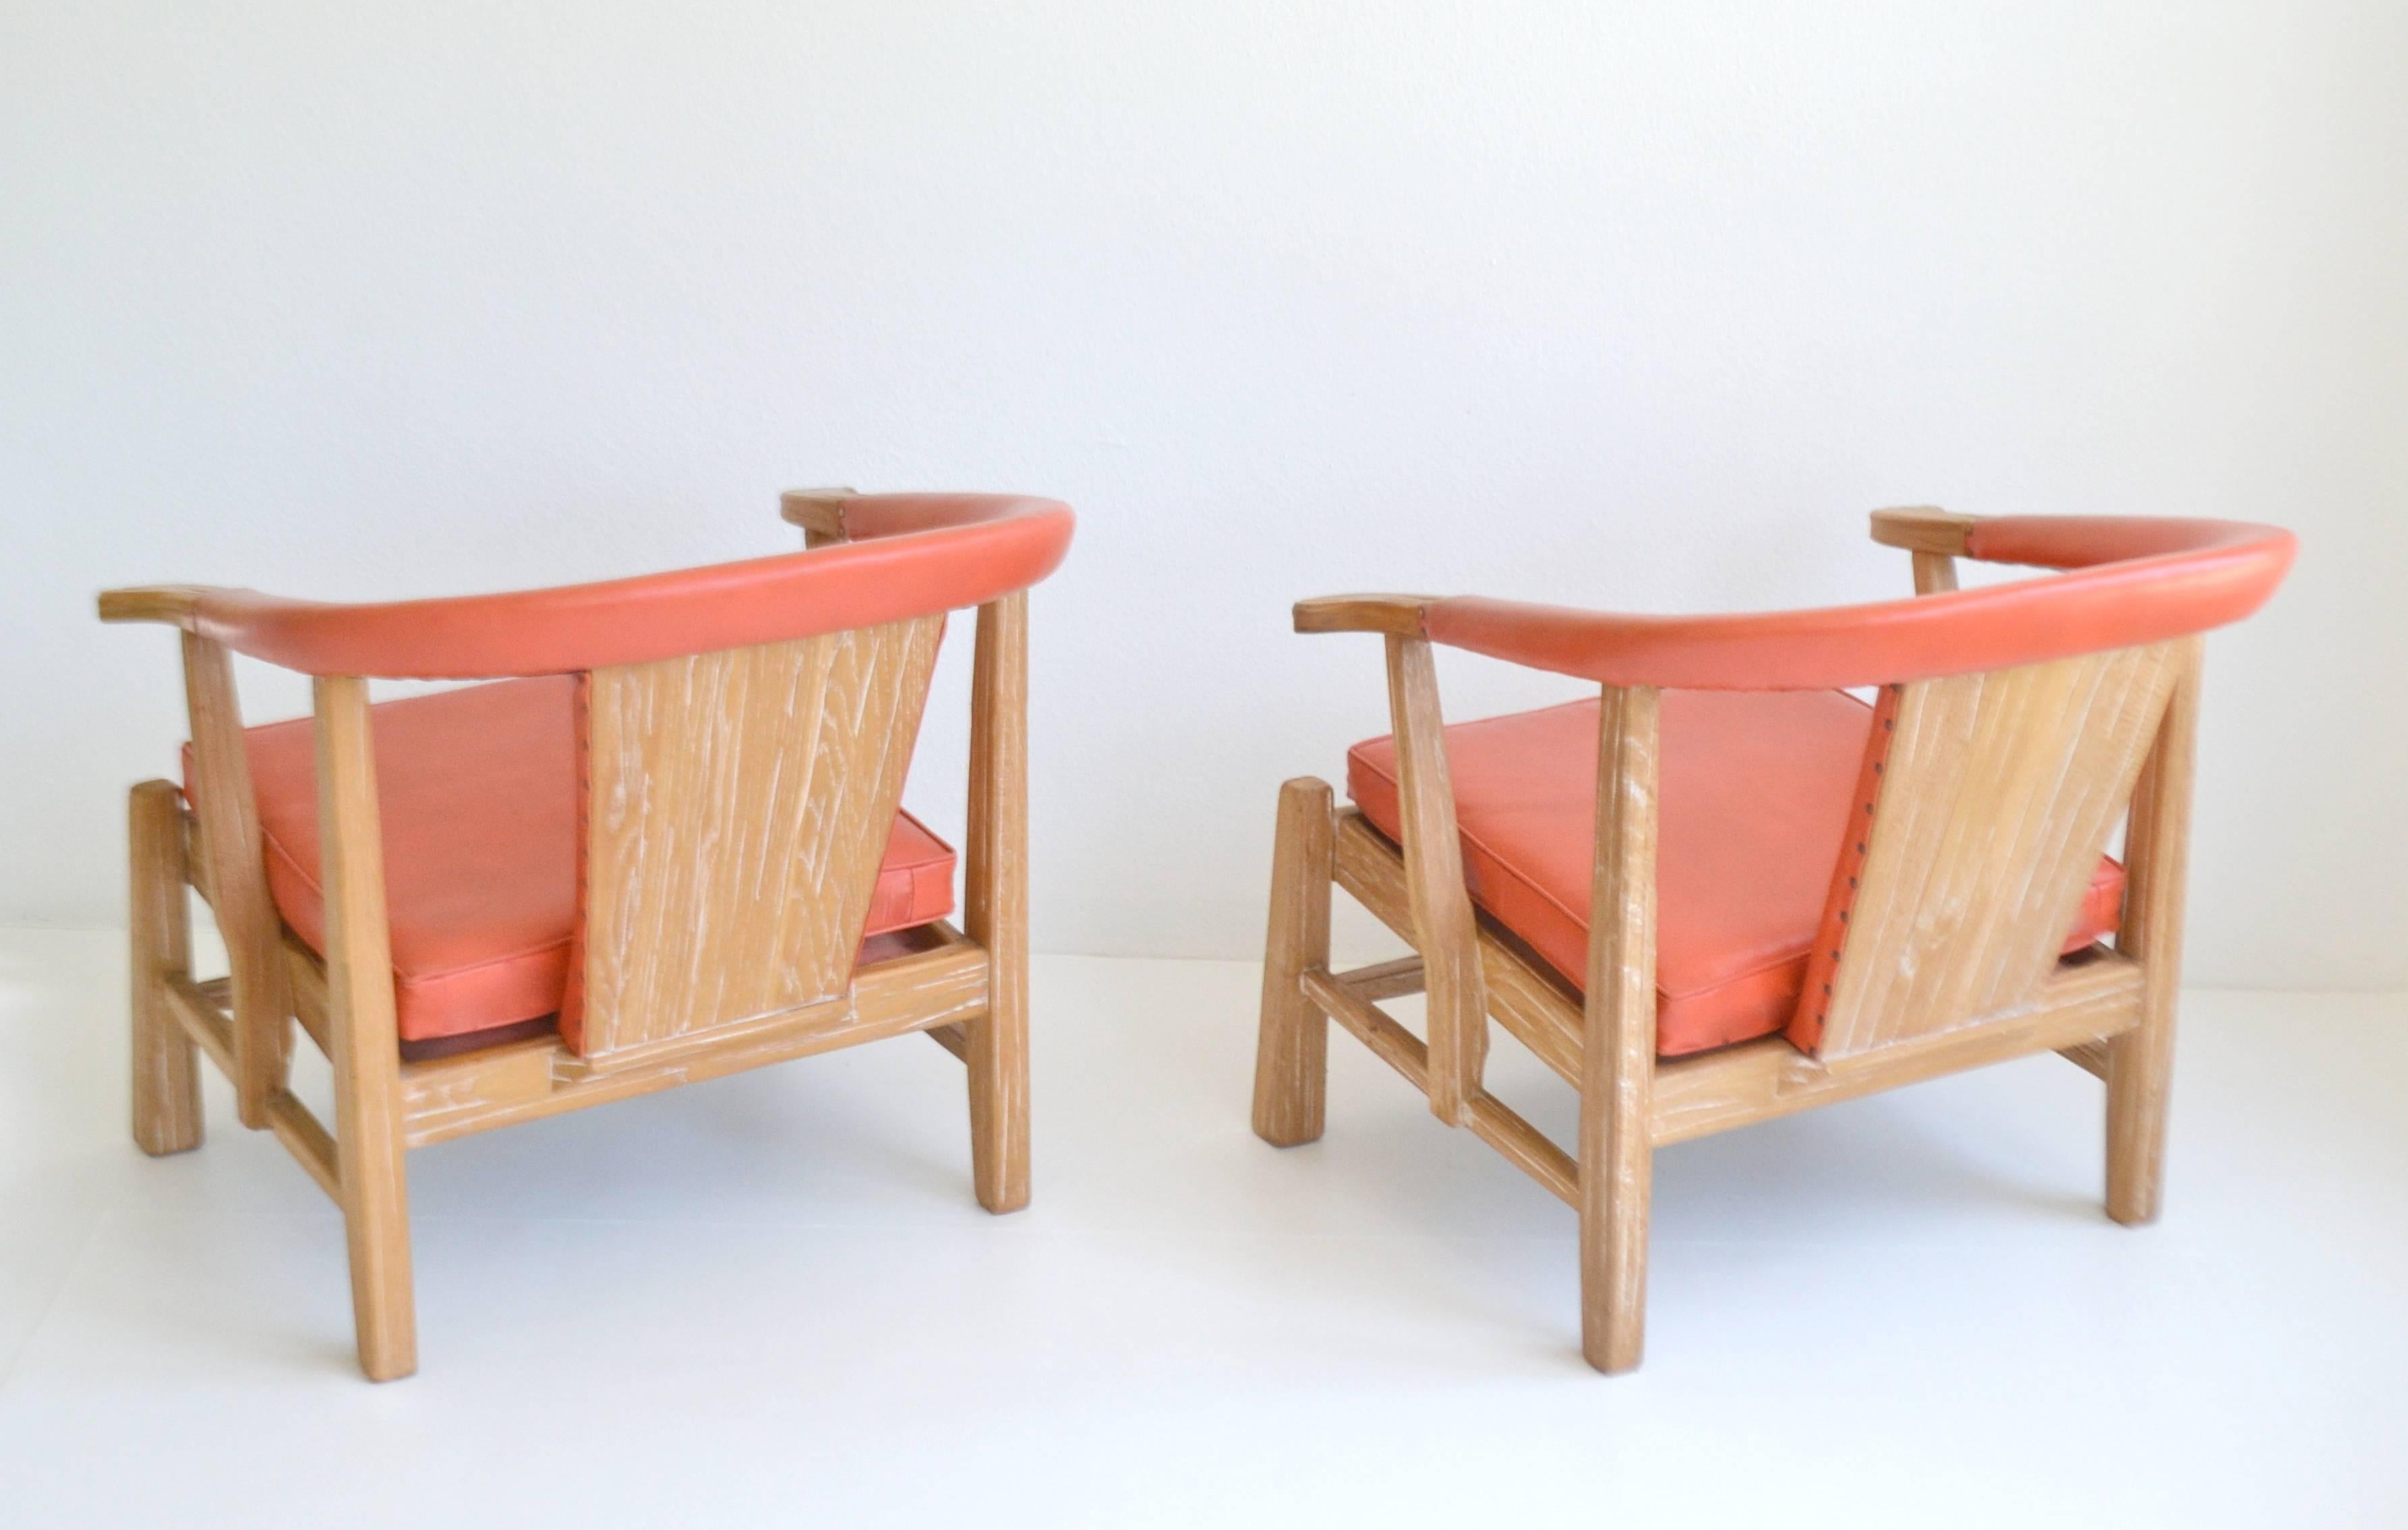 North American Pair of Midcentury Asian Inspired Club Chairs / Lounge Chairs For Sale